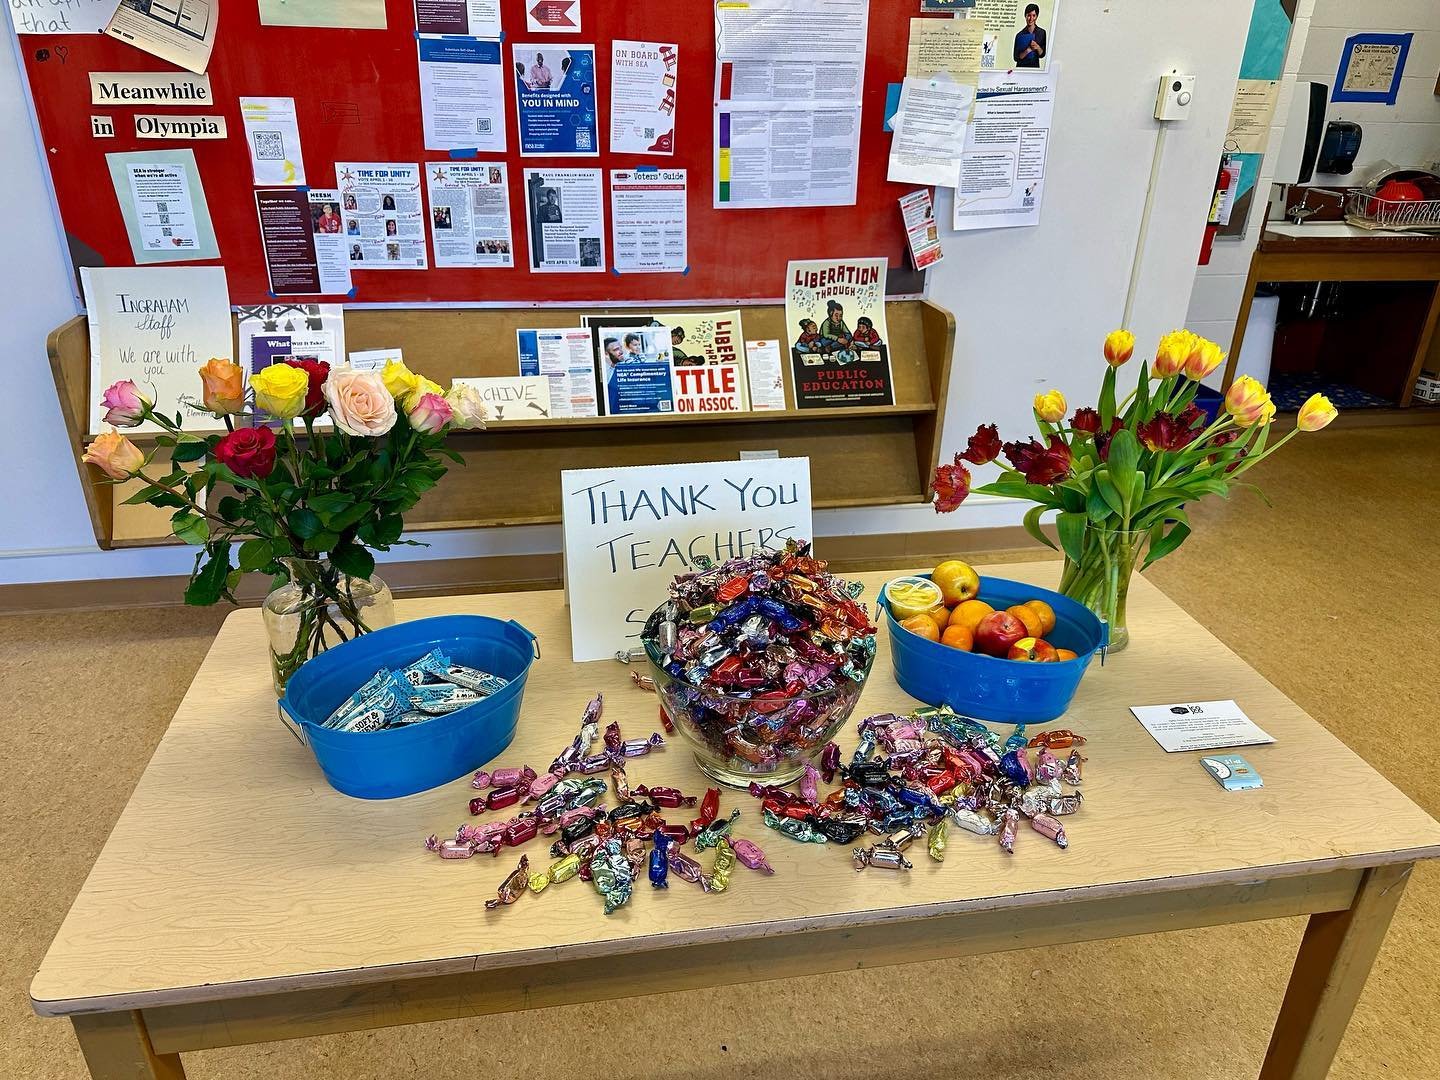 FOI treated our teachers and staff to Seattle Chocolates truffles and flowers yesterday!